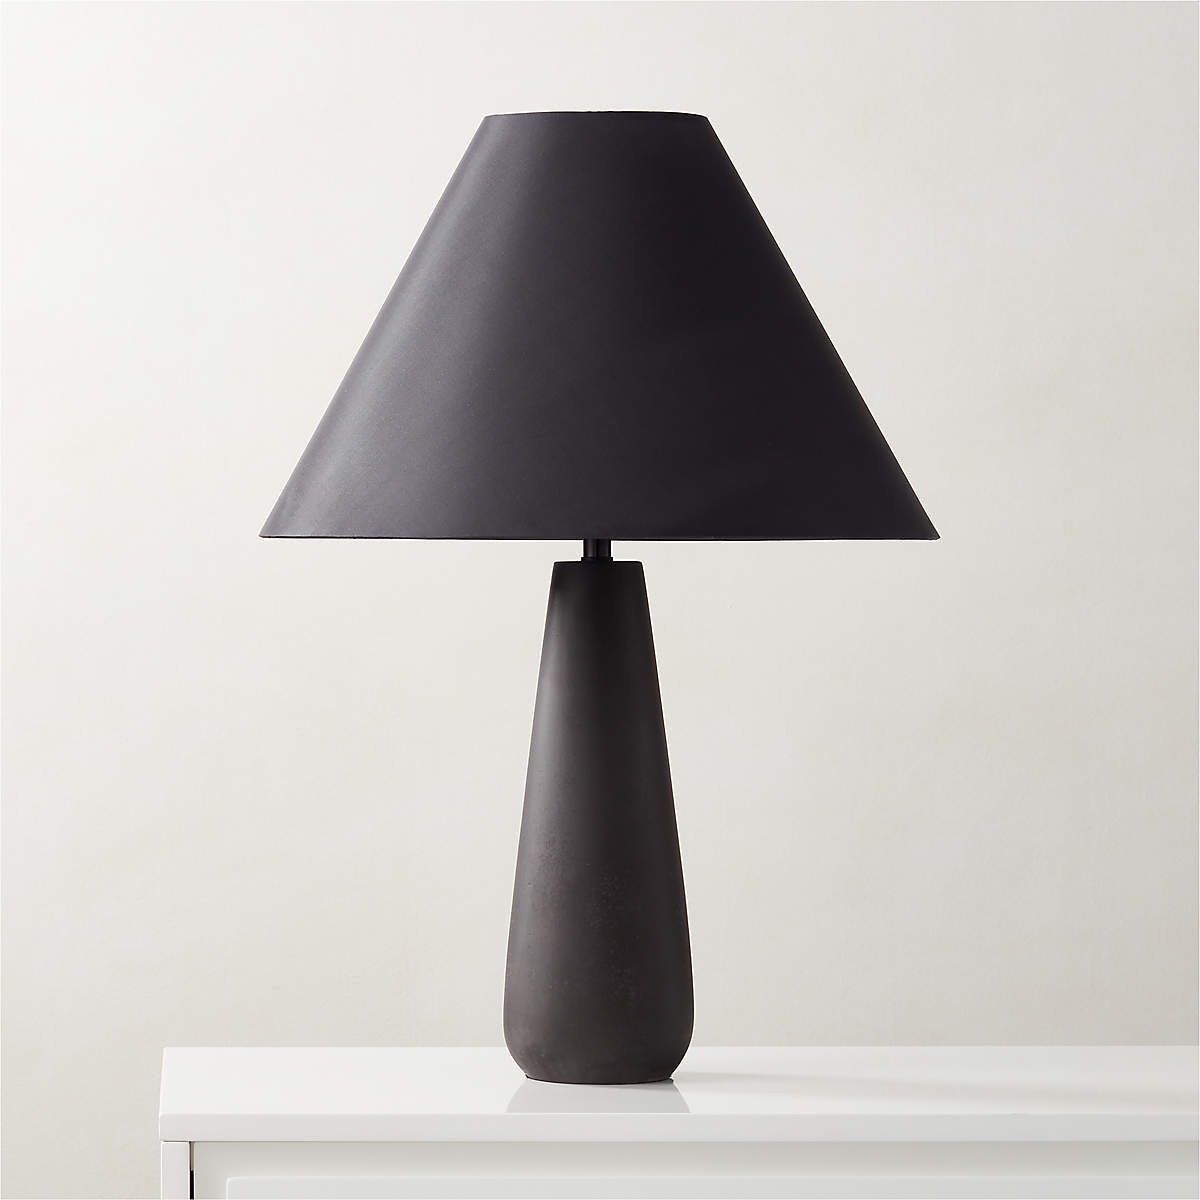 The Beauty of Mushroom Table Lamps